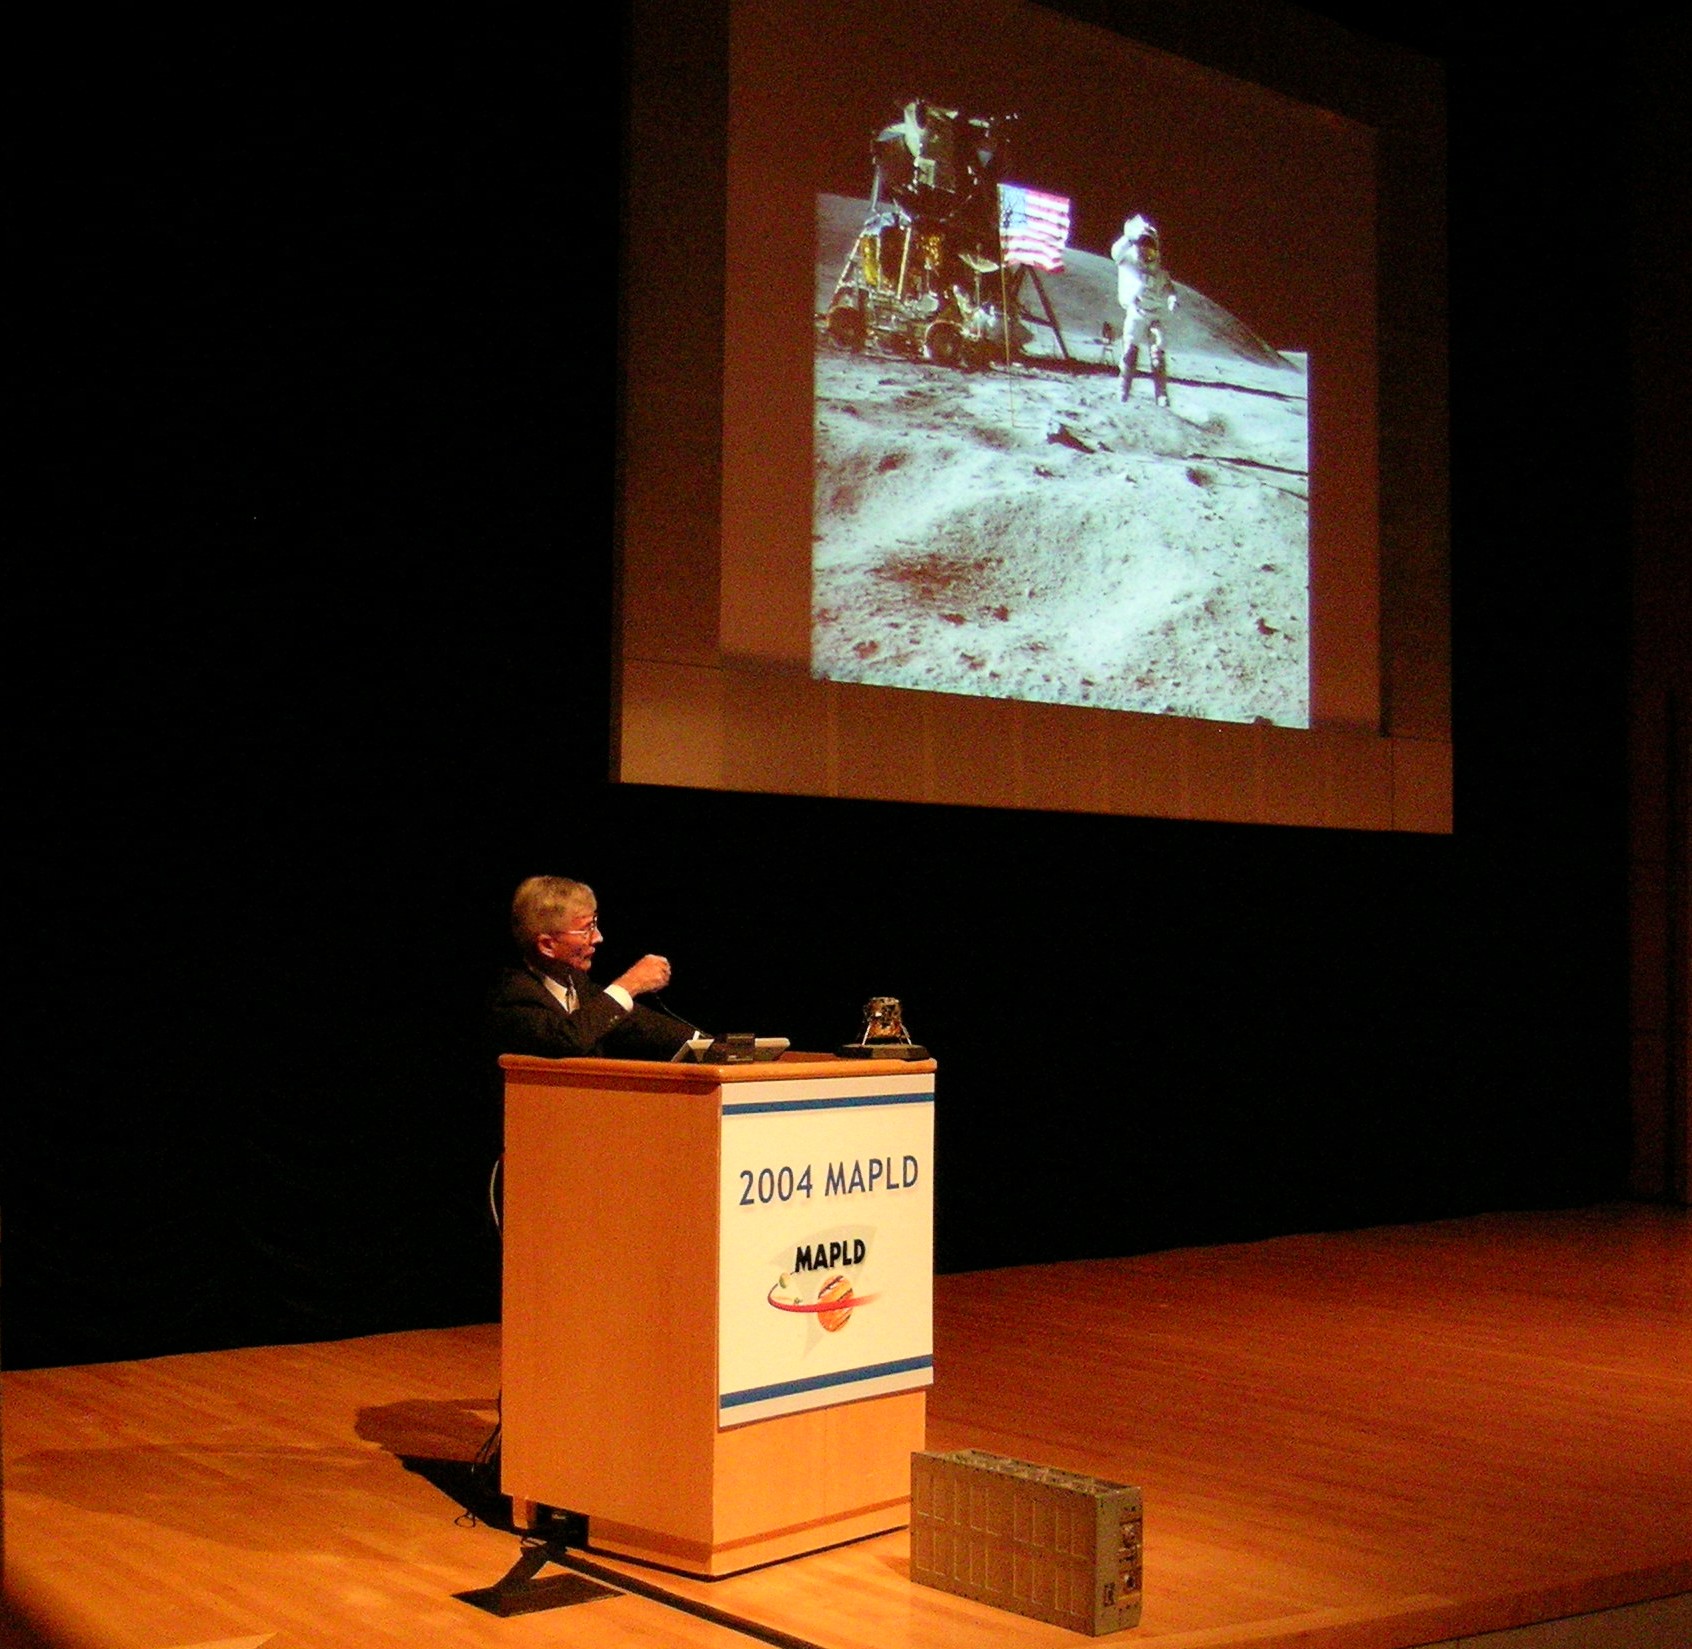 Captain John Young of the NASA Johnson Space Center presents at the 2004 MAPLD International Conference: "The Past, Present, and Future of Human Space Exploration"